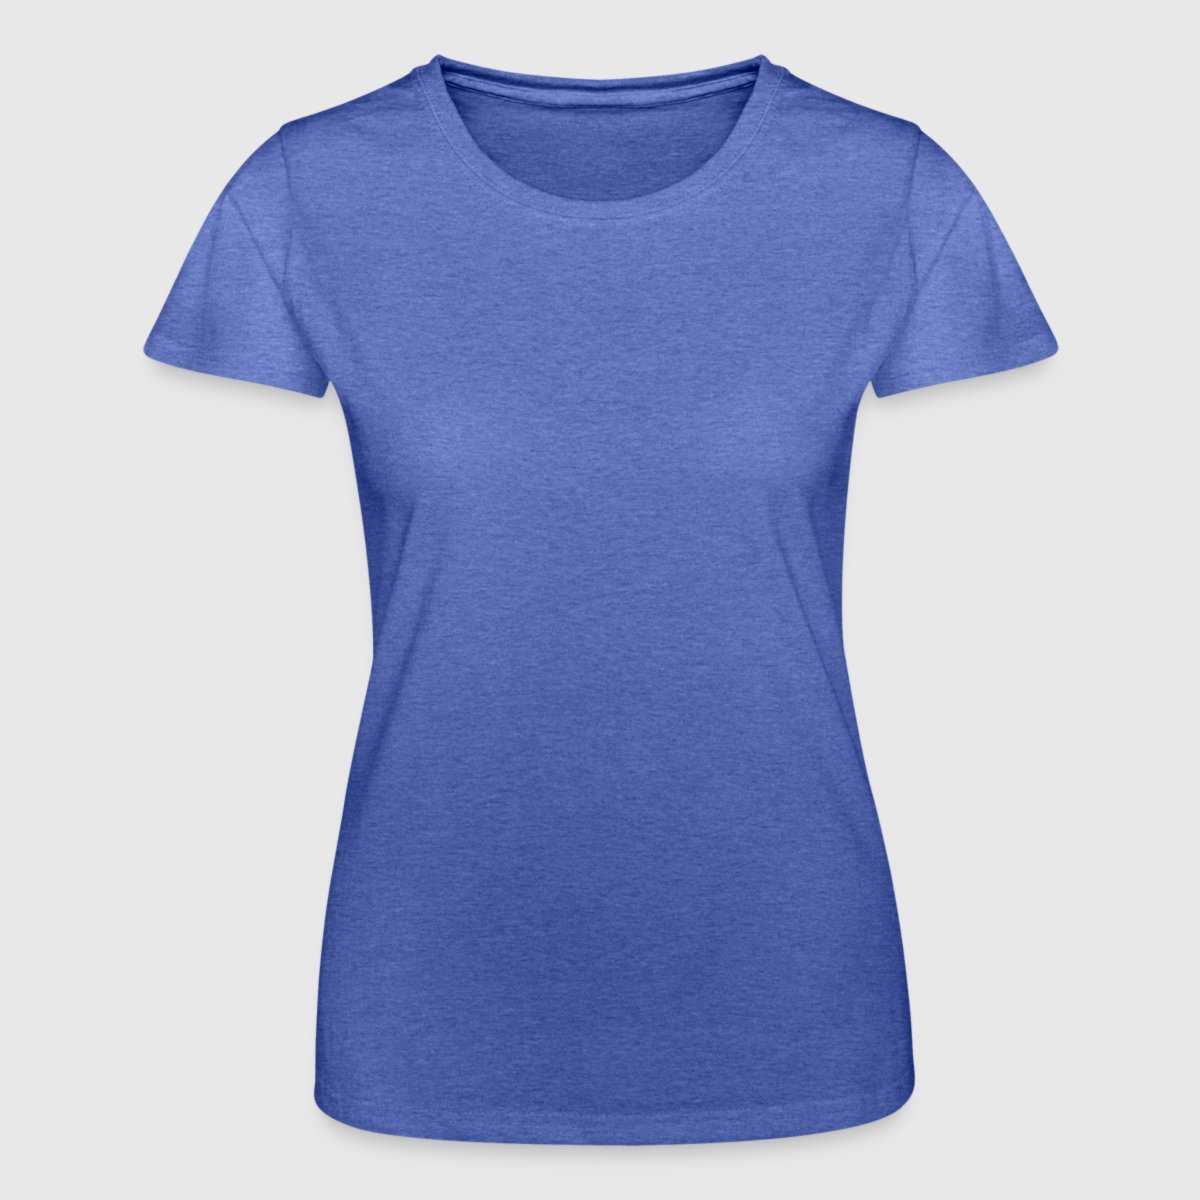 Women's T-Shirt by Fruit of the Loom - Front